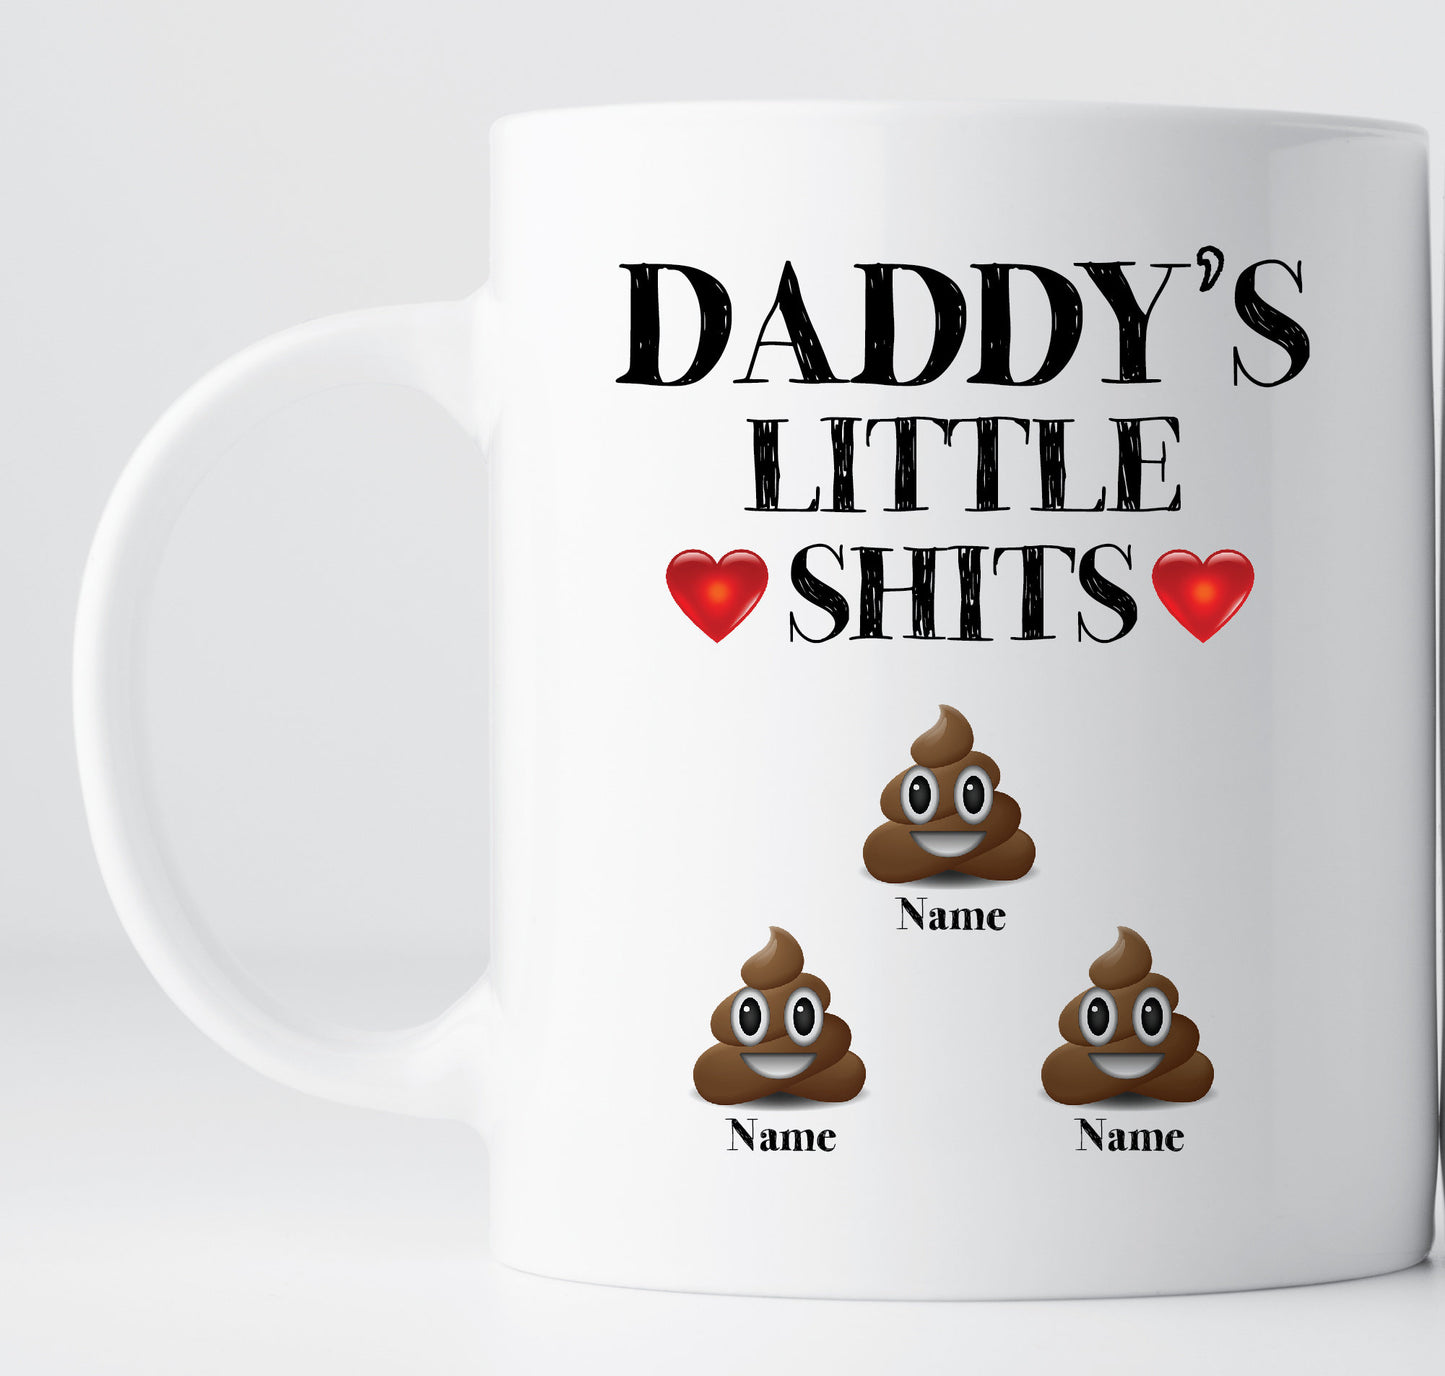 Daddy's Little Shits Mug, Funny Personalised Mug For Dad, Customised Rude Father's Day Gift, Personalised Daddy Mug, Funny Gift For Dad.